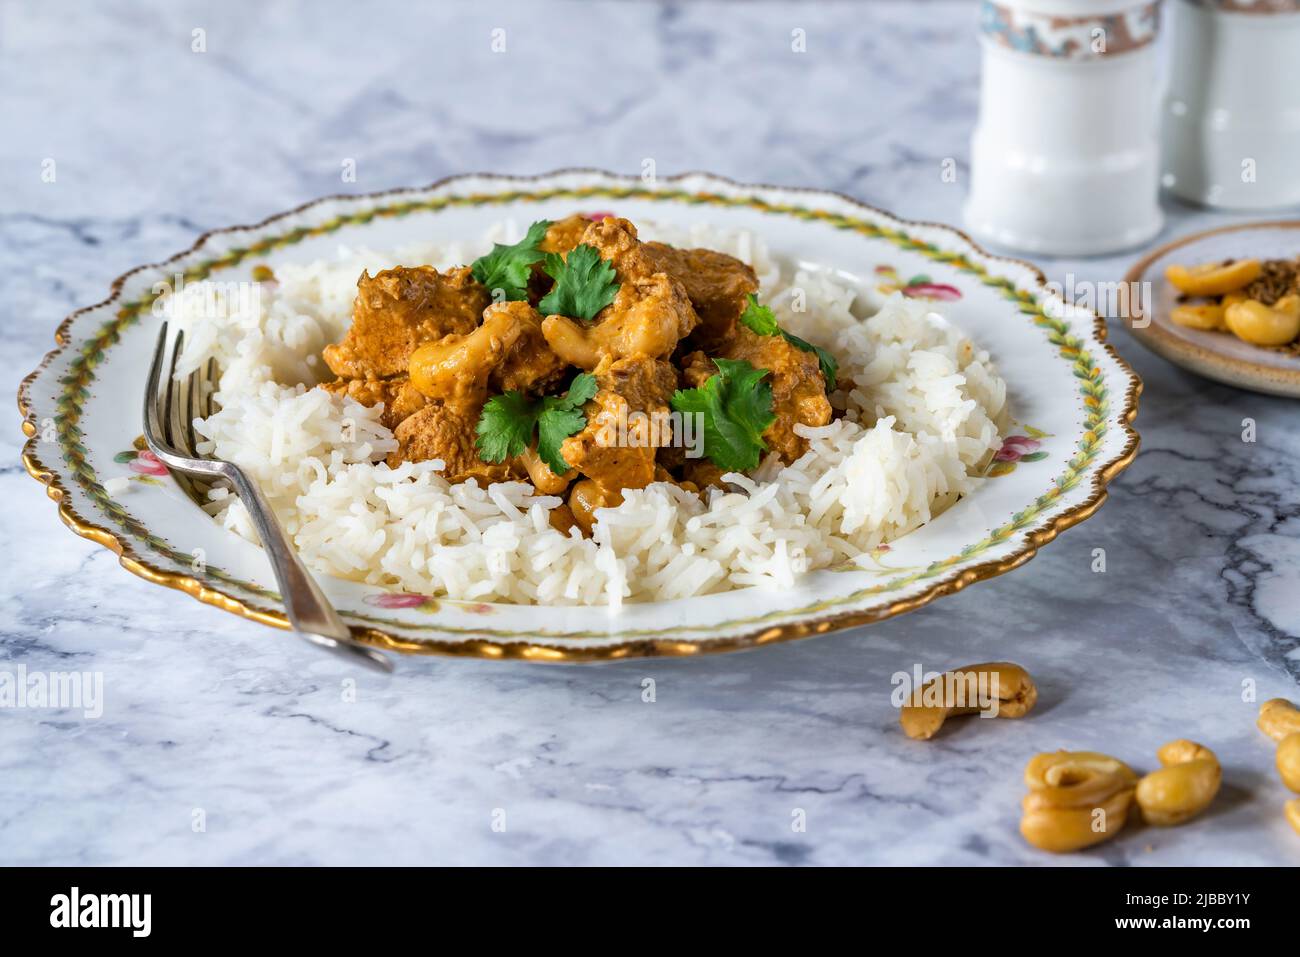 Chicken korma curry with cashew nuts and rice Stock Photo